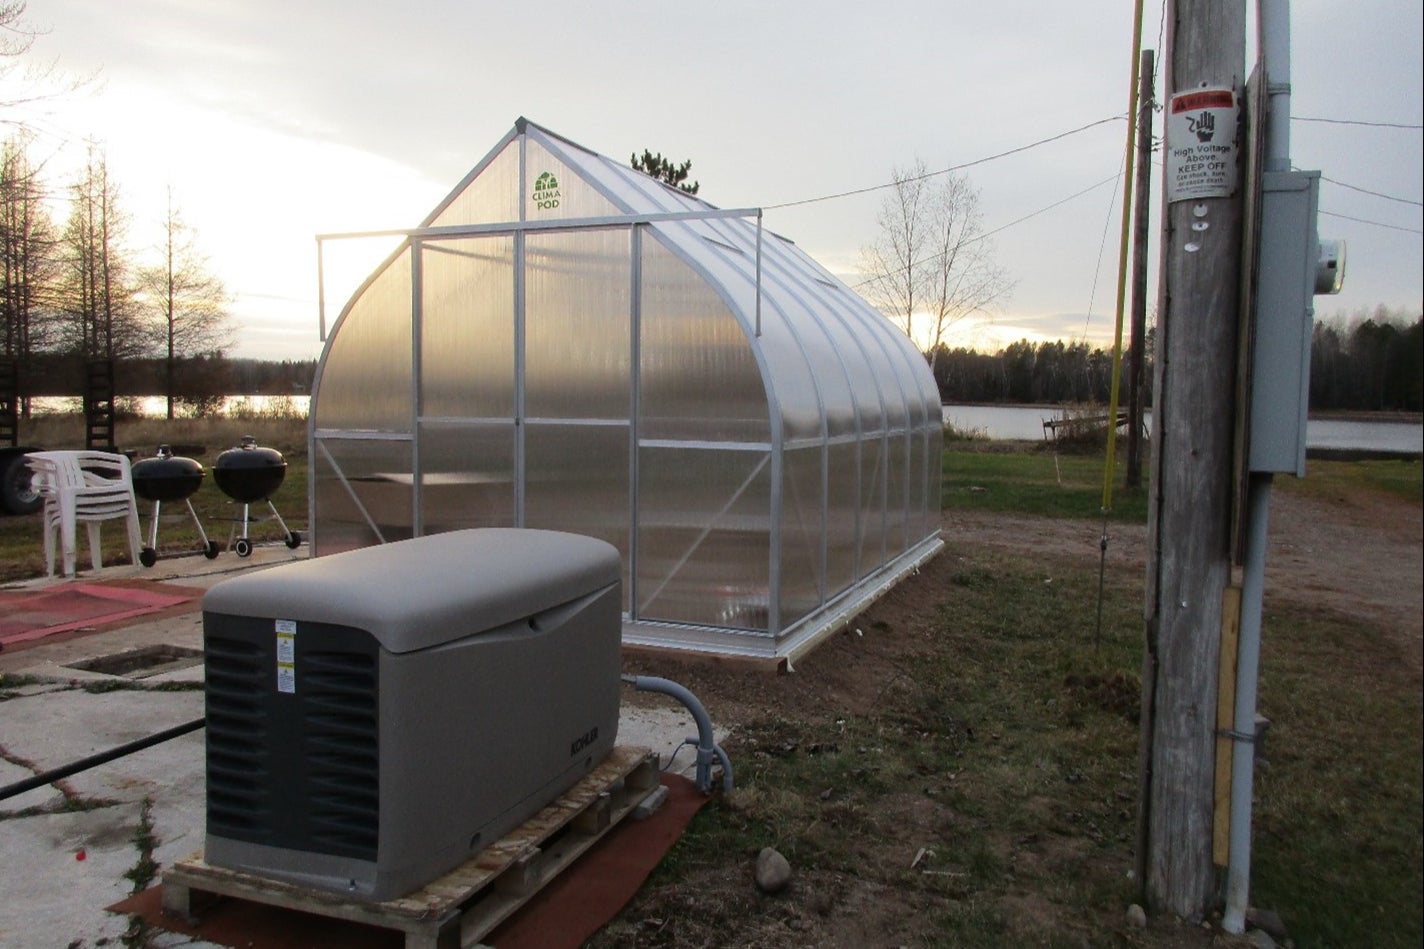 Each Fortitude Ranch location has communal facilities such as greenhouses